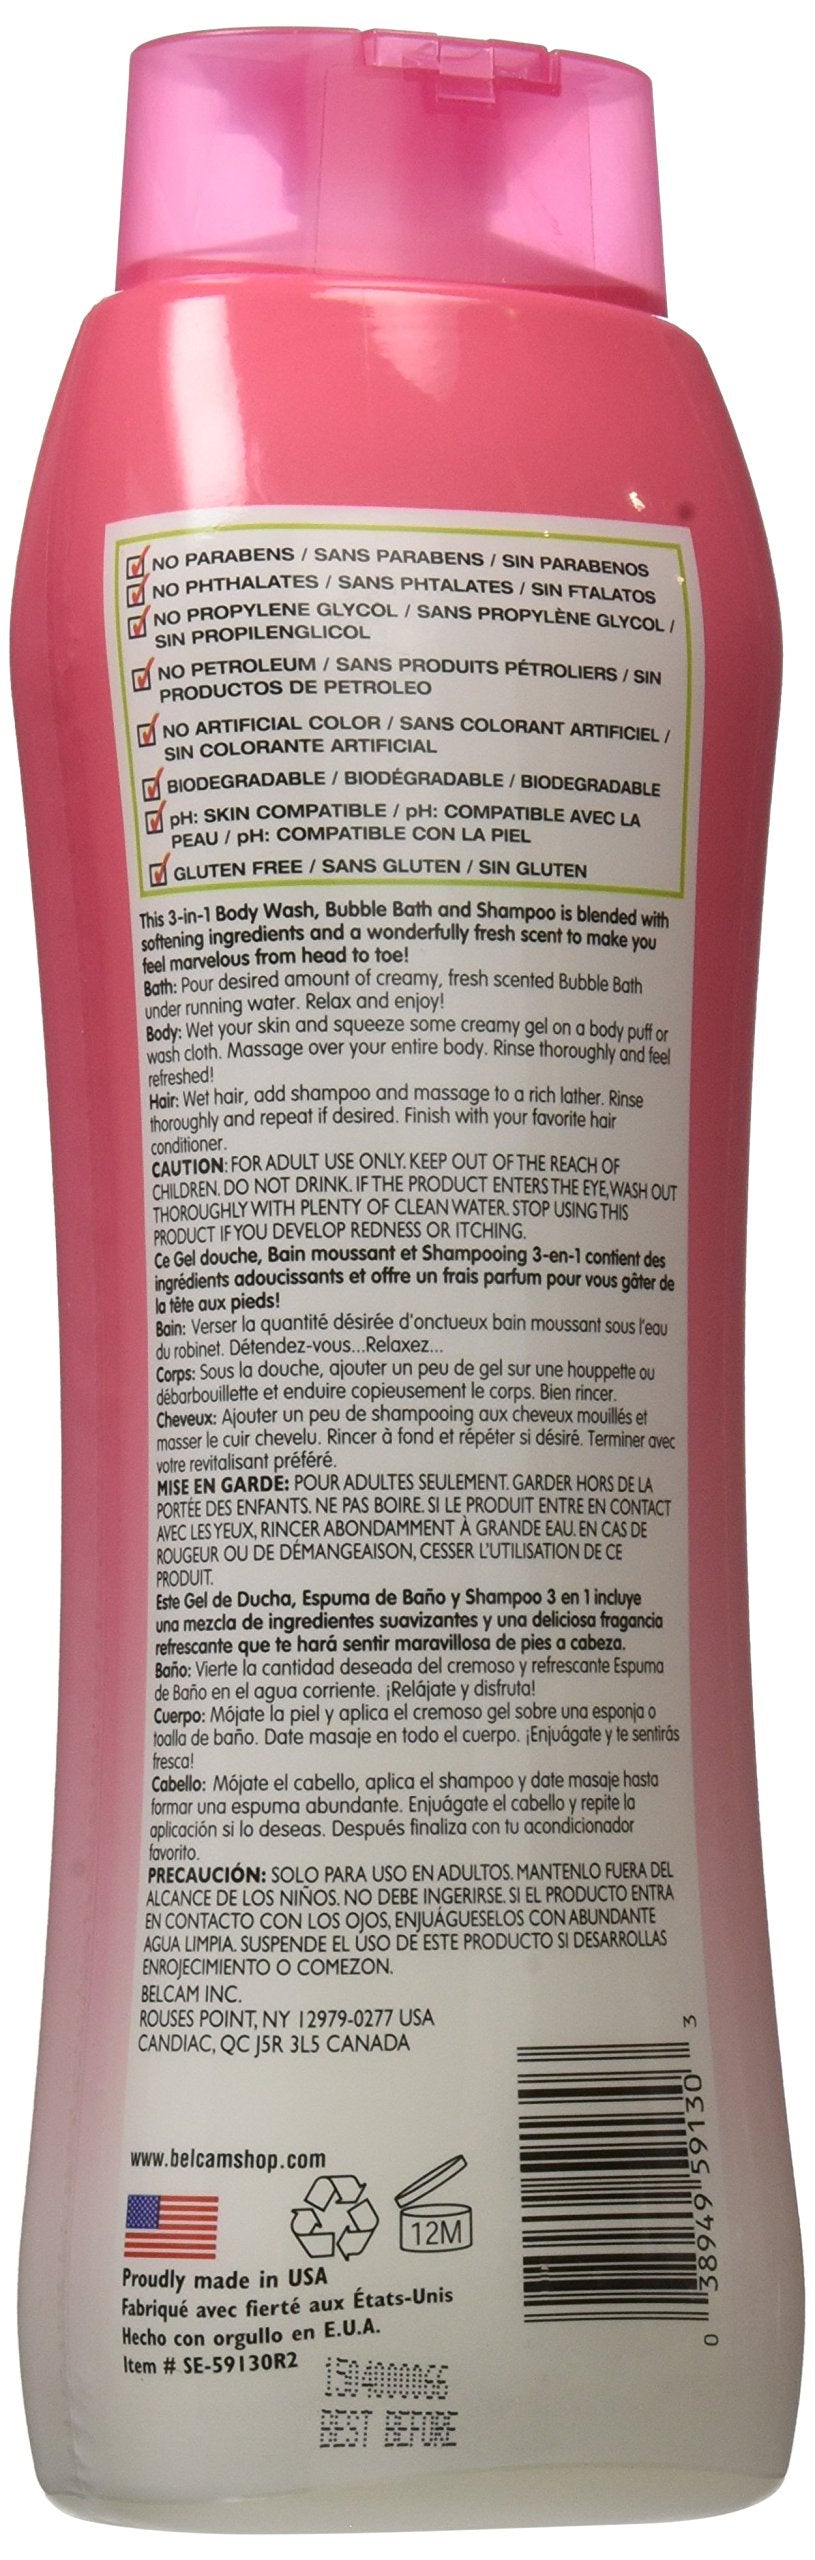 Belcam Bath Therapy 3 in 1 Body Wash, Bubble Bath and Shampoo, Strawberries and Cream, 32 Fluid Ounce